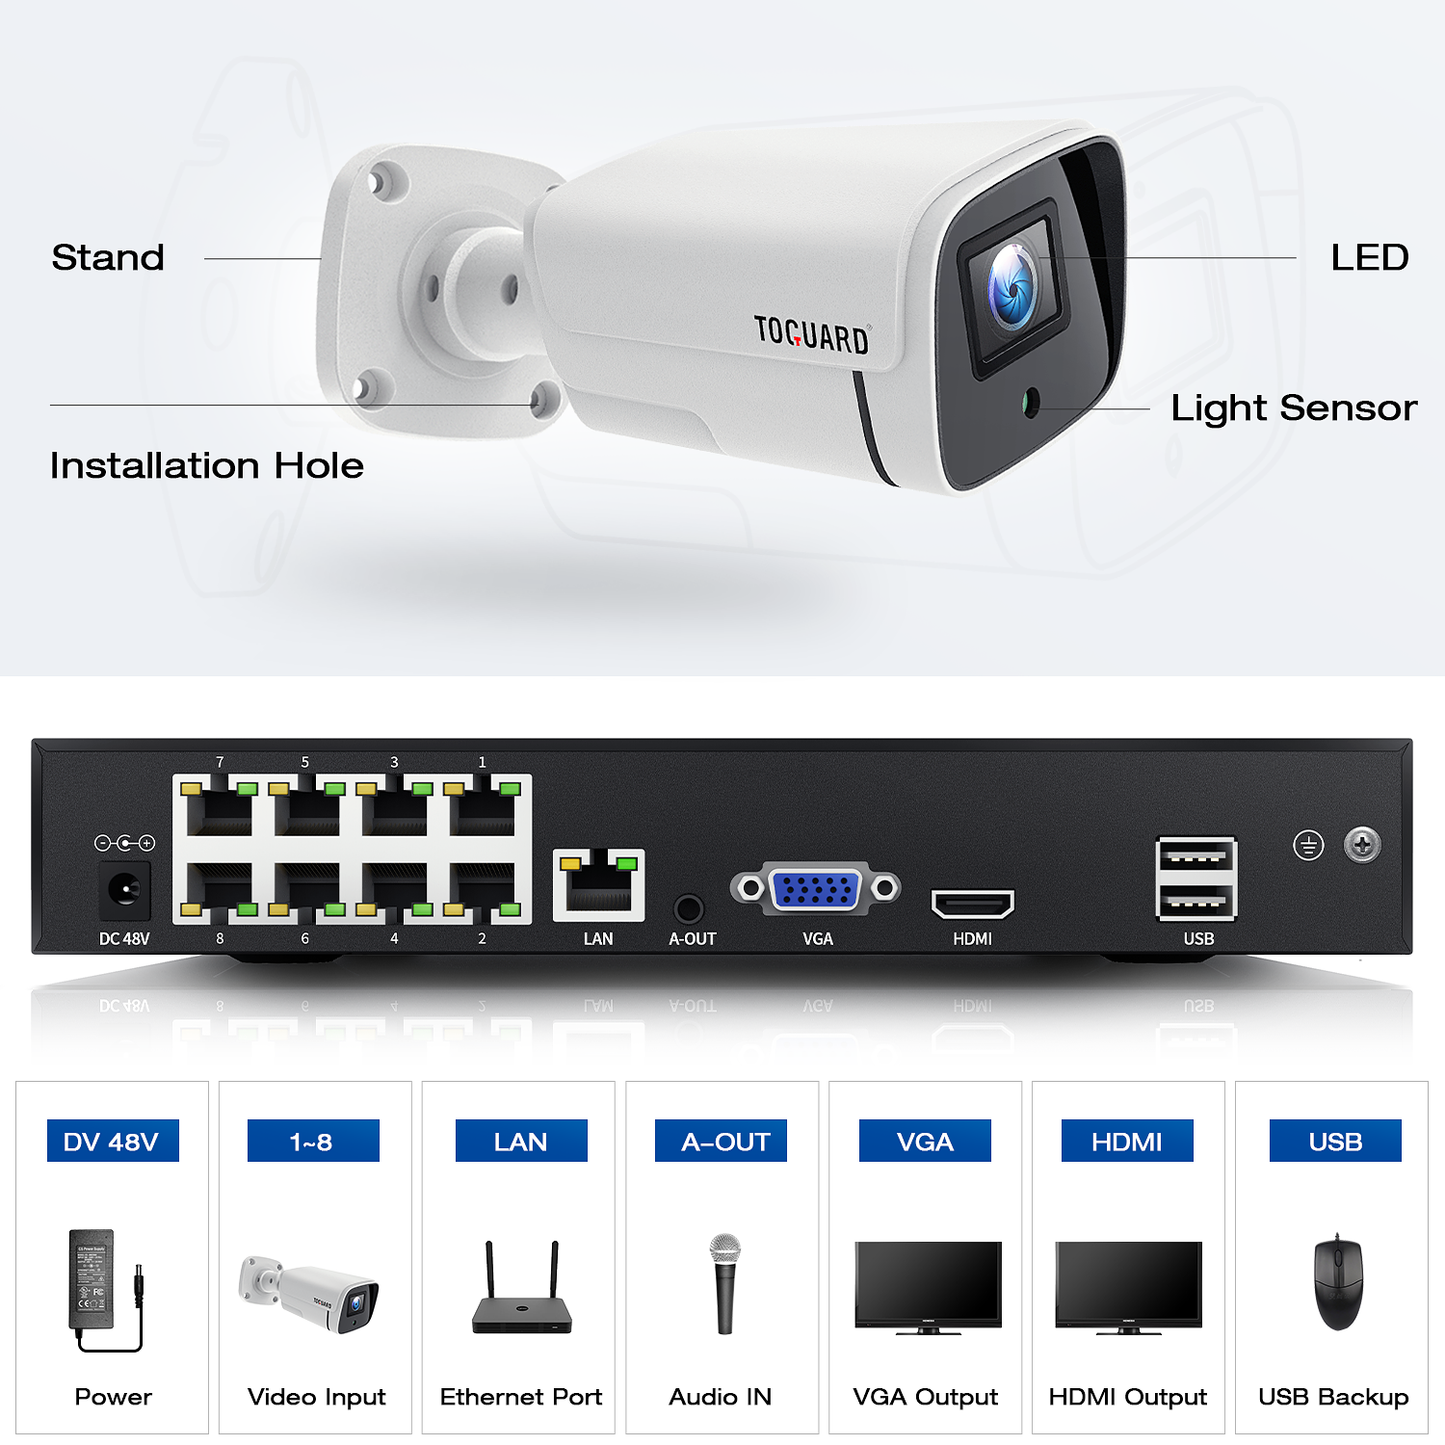 TOGUARD 5MP PoE Home Security Camera System Outdoor Indoor,8CH H.265+ NVR 4pcs Wired POE IP Security Cameras with Night Vision, Waterproof, Email Alert,24/7 Recording